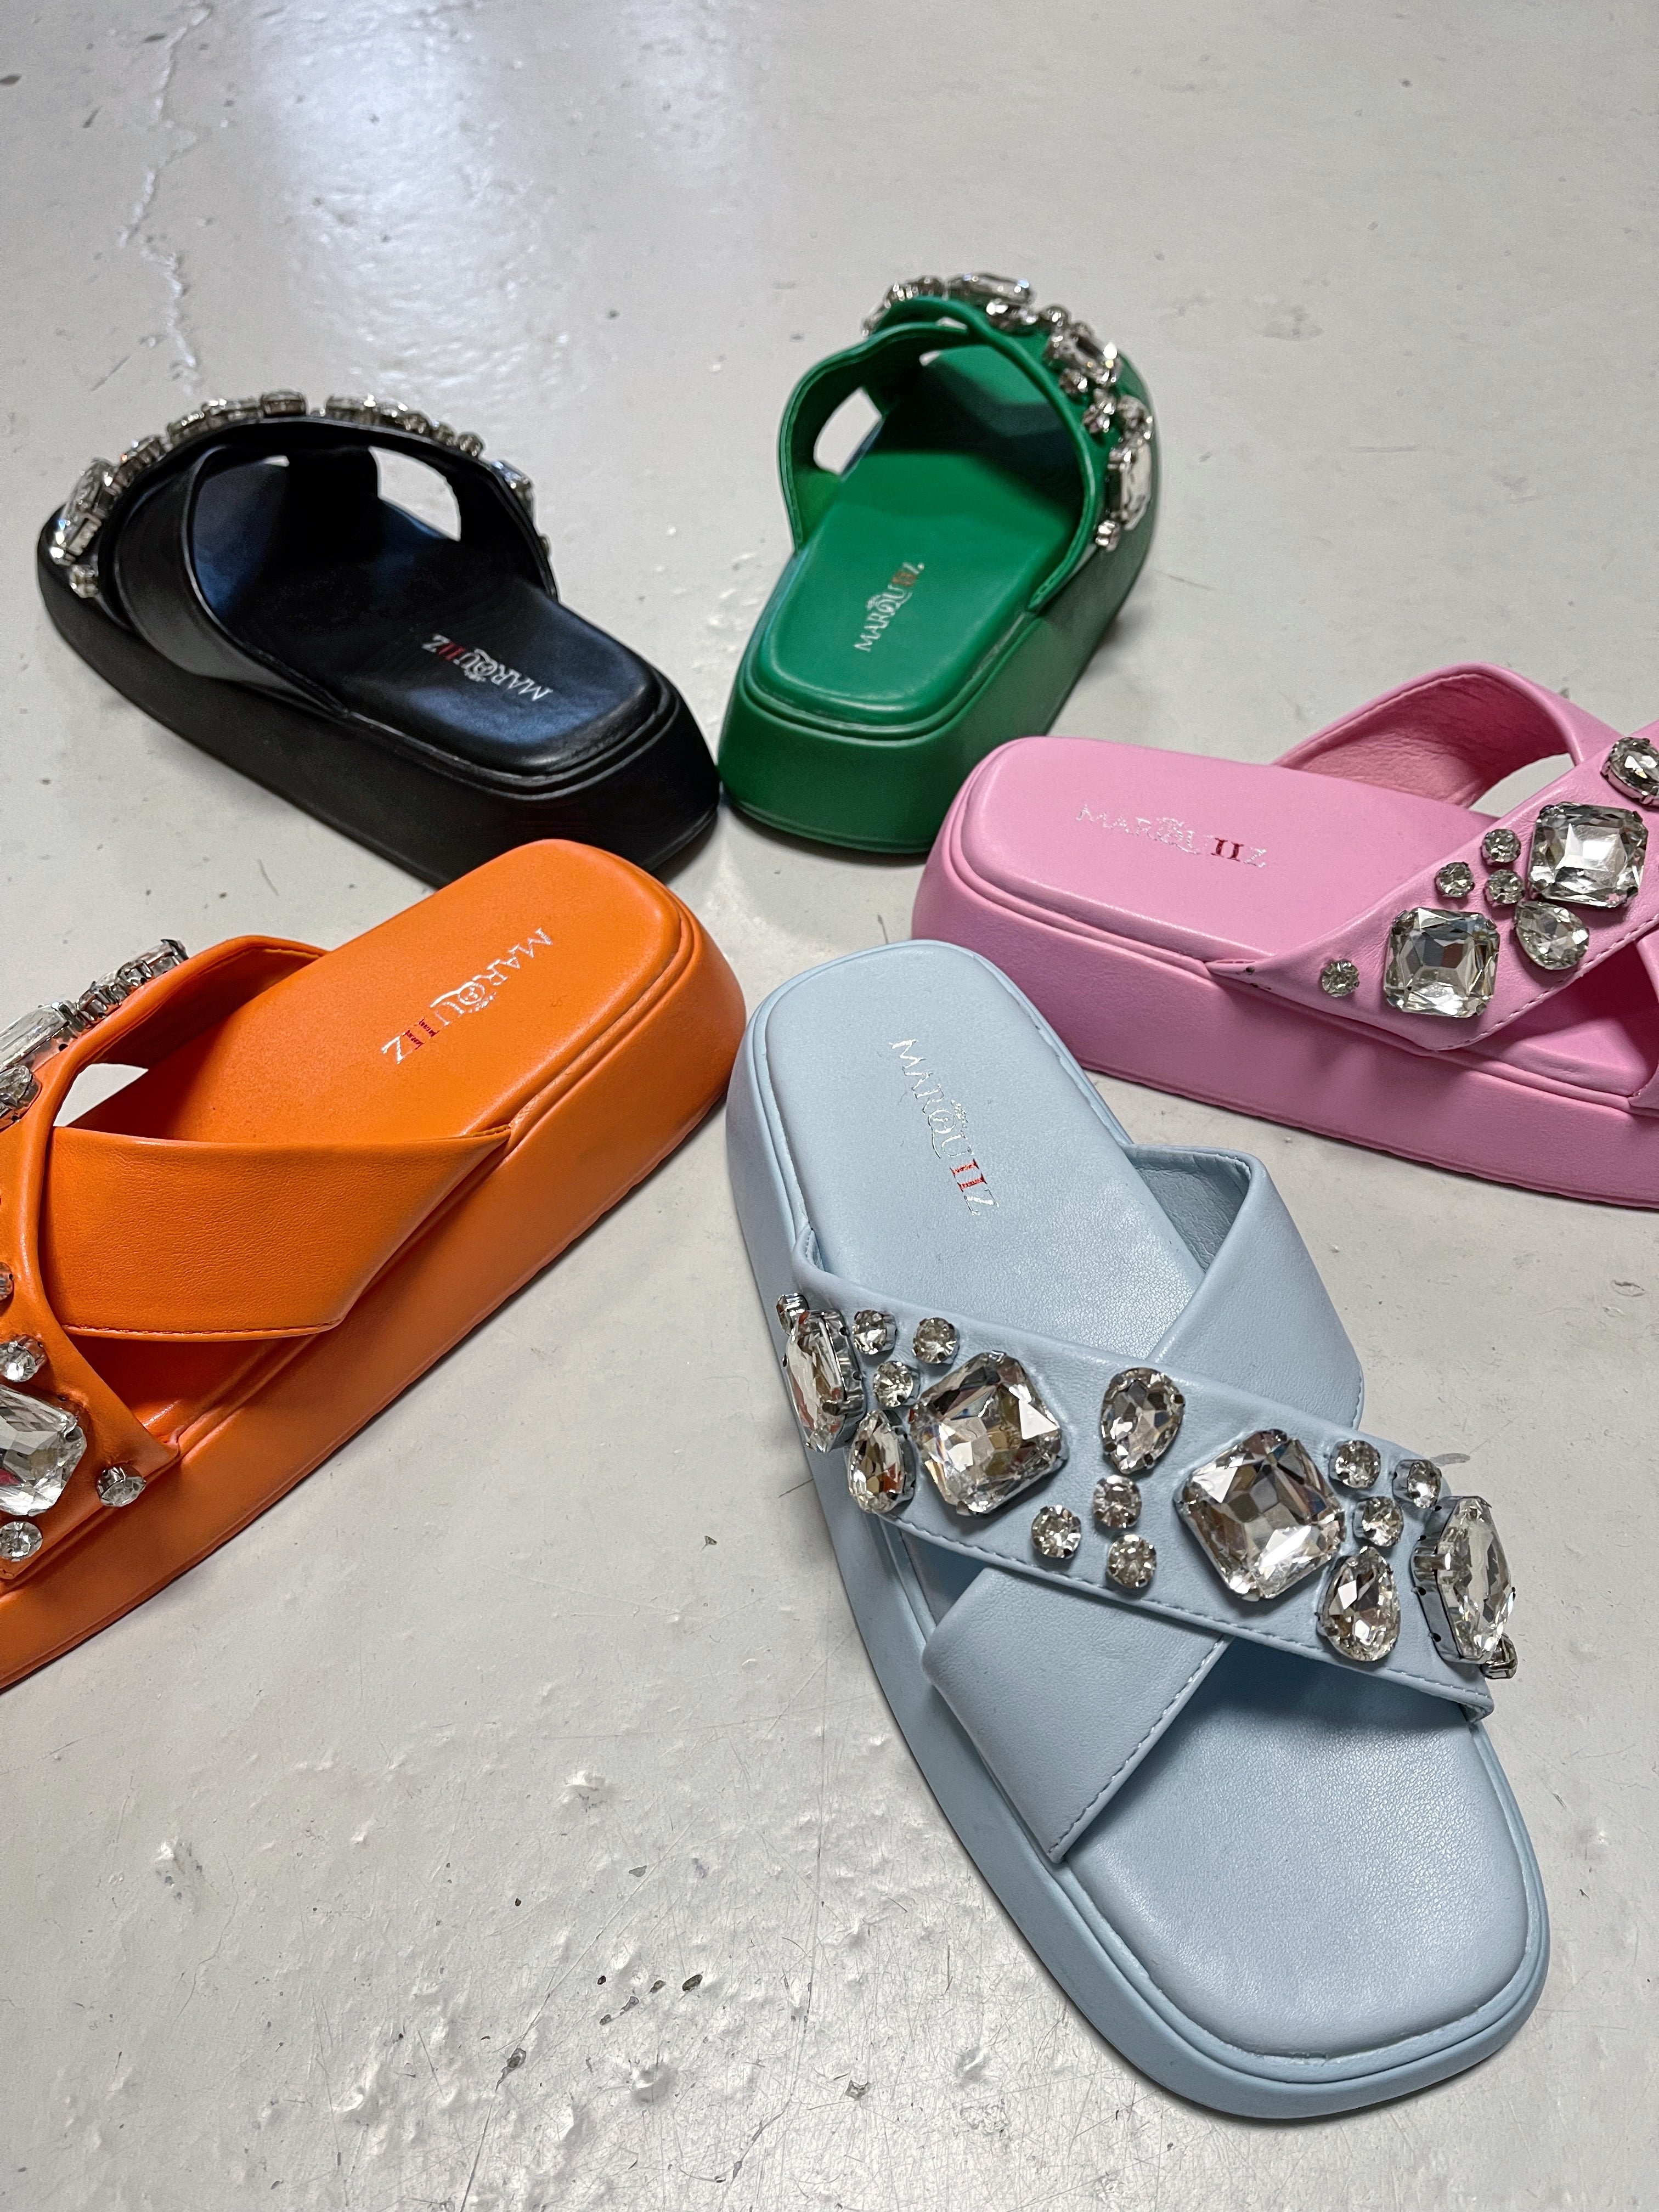 Sandals with criss cross and bling